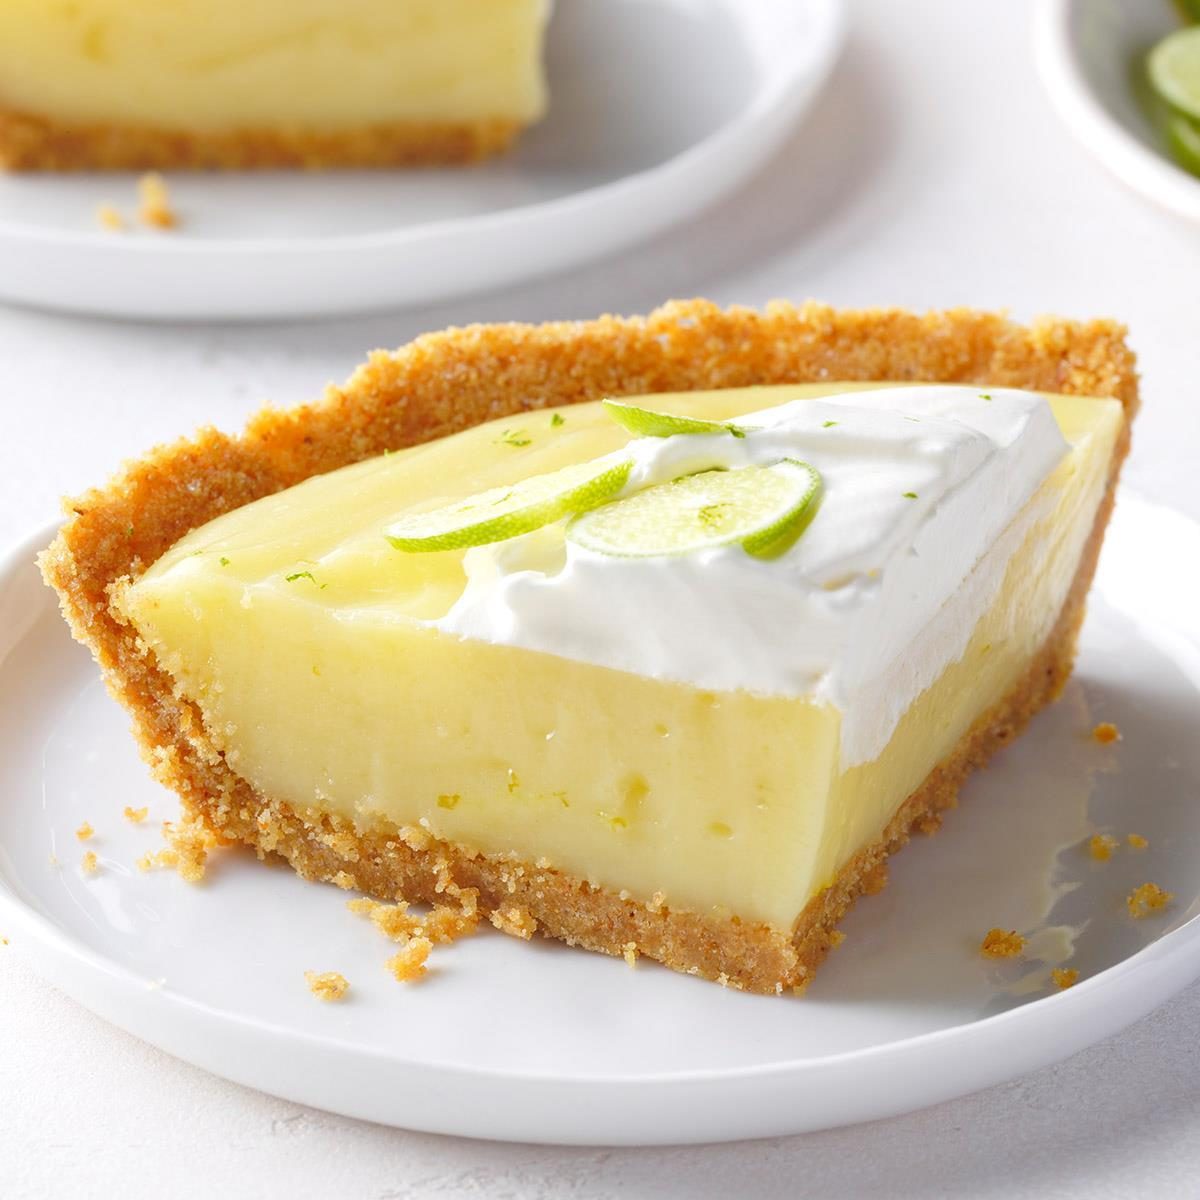 Key Lime Pie Recipe: How to Make It